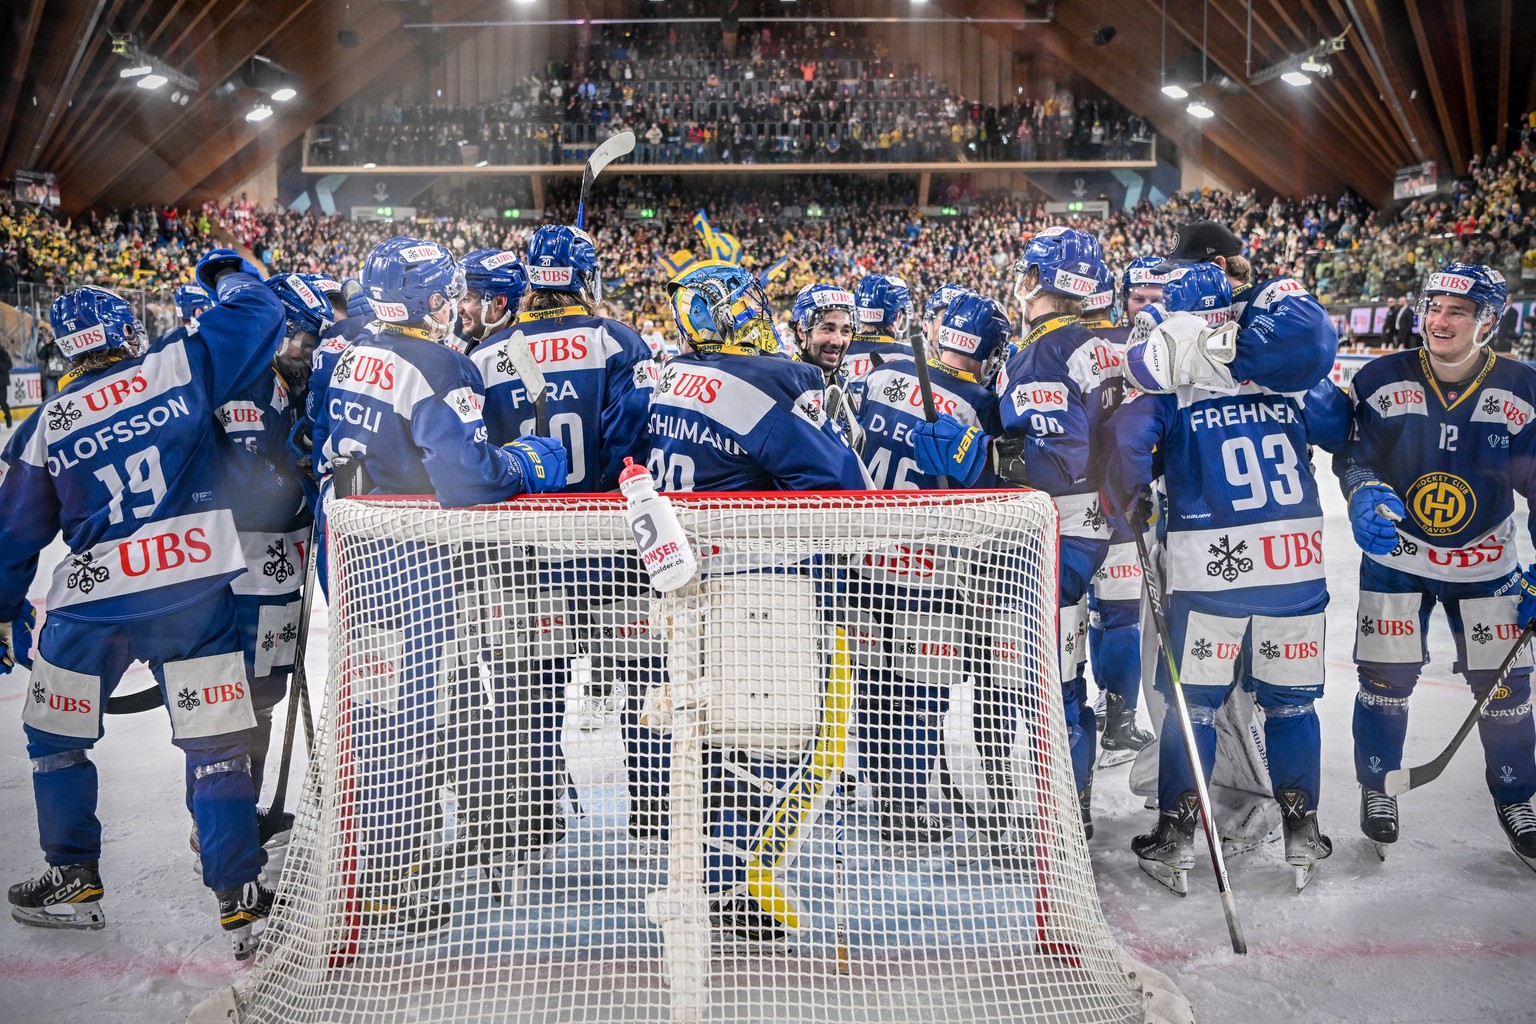 Davos&#039; players celebrate after winning the final game between Switzerland&#039;s HC Davos and HC Dynamo Pardubice, at the 95th Spengler Cup ice hockey tournament in Davos, Switzerland, on Sunday, ...